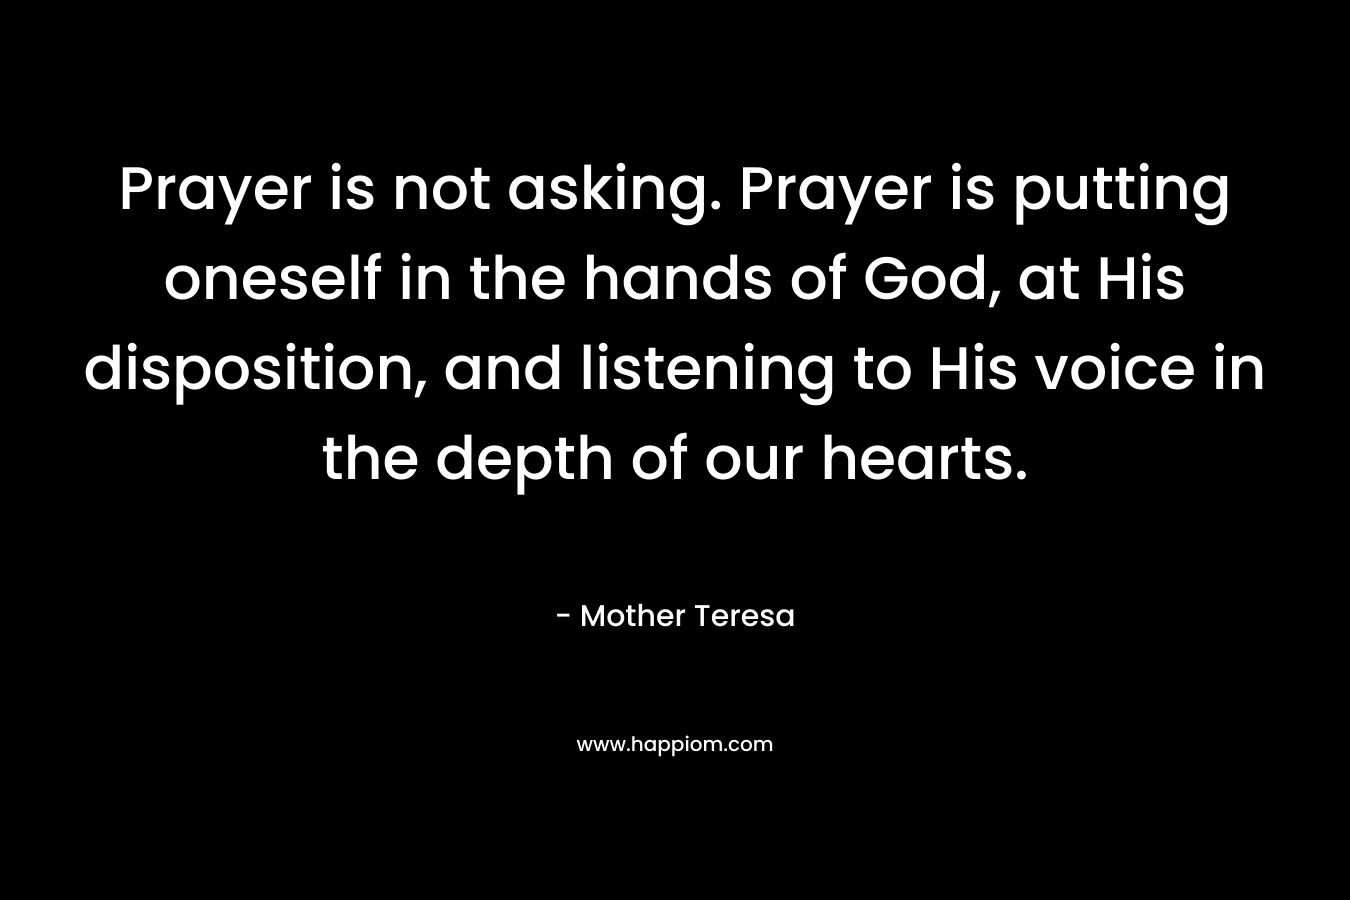 Prayer is not asking. Prayer is putting oneself in the hands of God, at His disposition, and listening to His voice in the depth of our hearts. – Mother Teresa